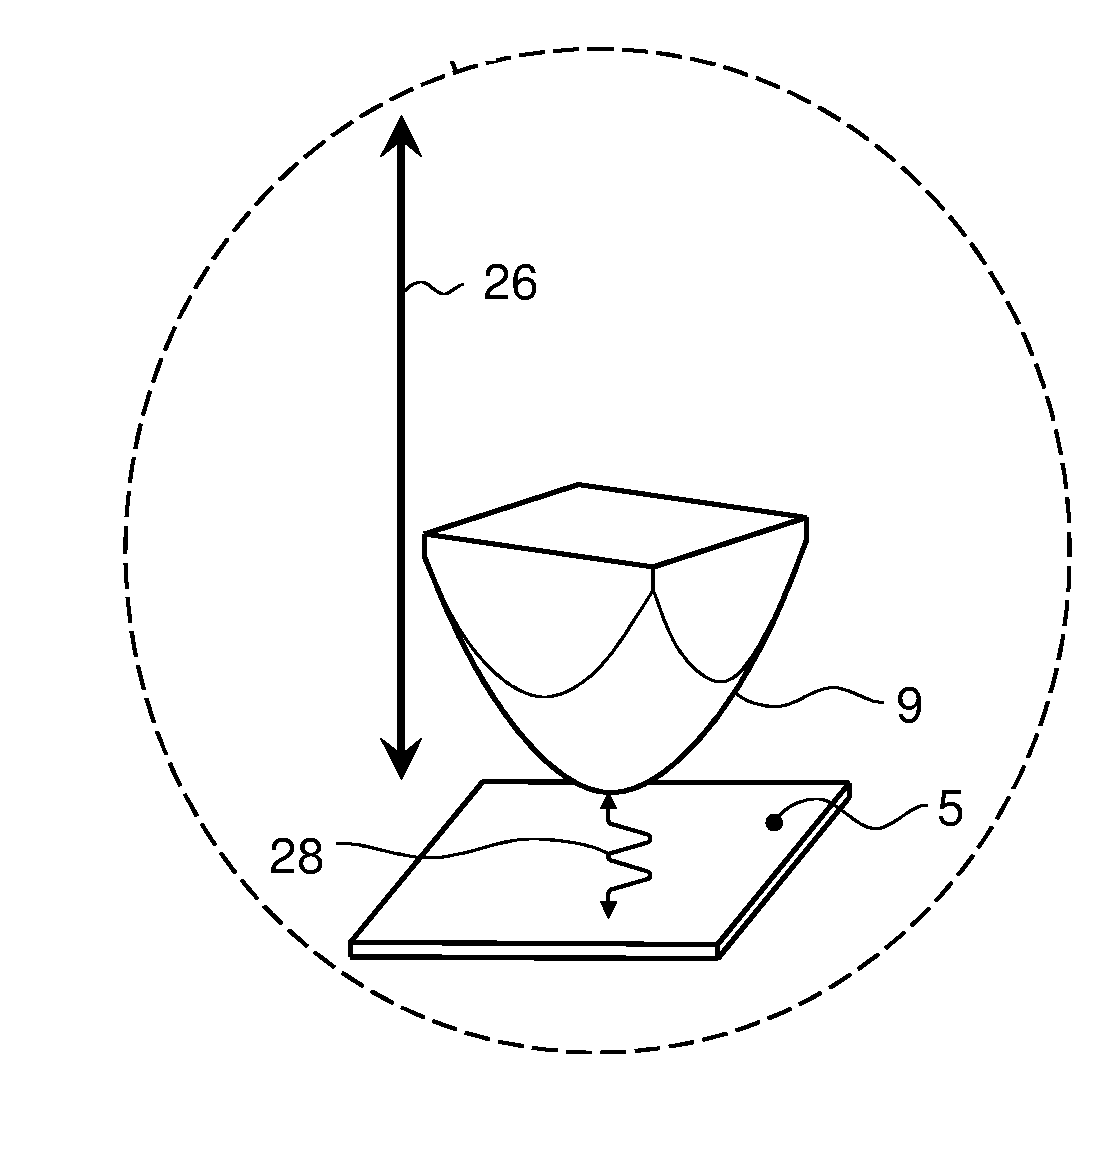 Method of performing surface measurements on a surface of a sample, and scanning probe microscopy system therefore